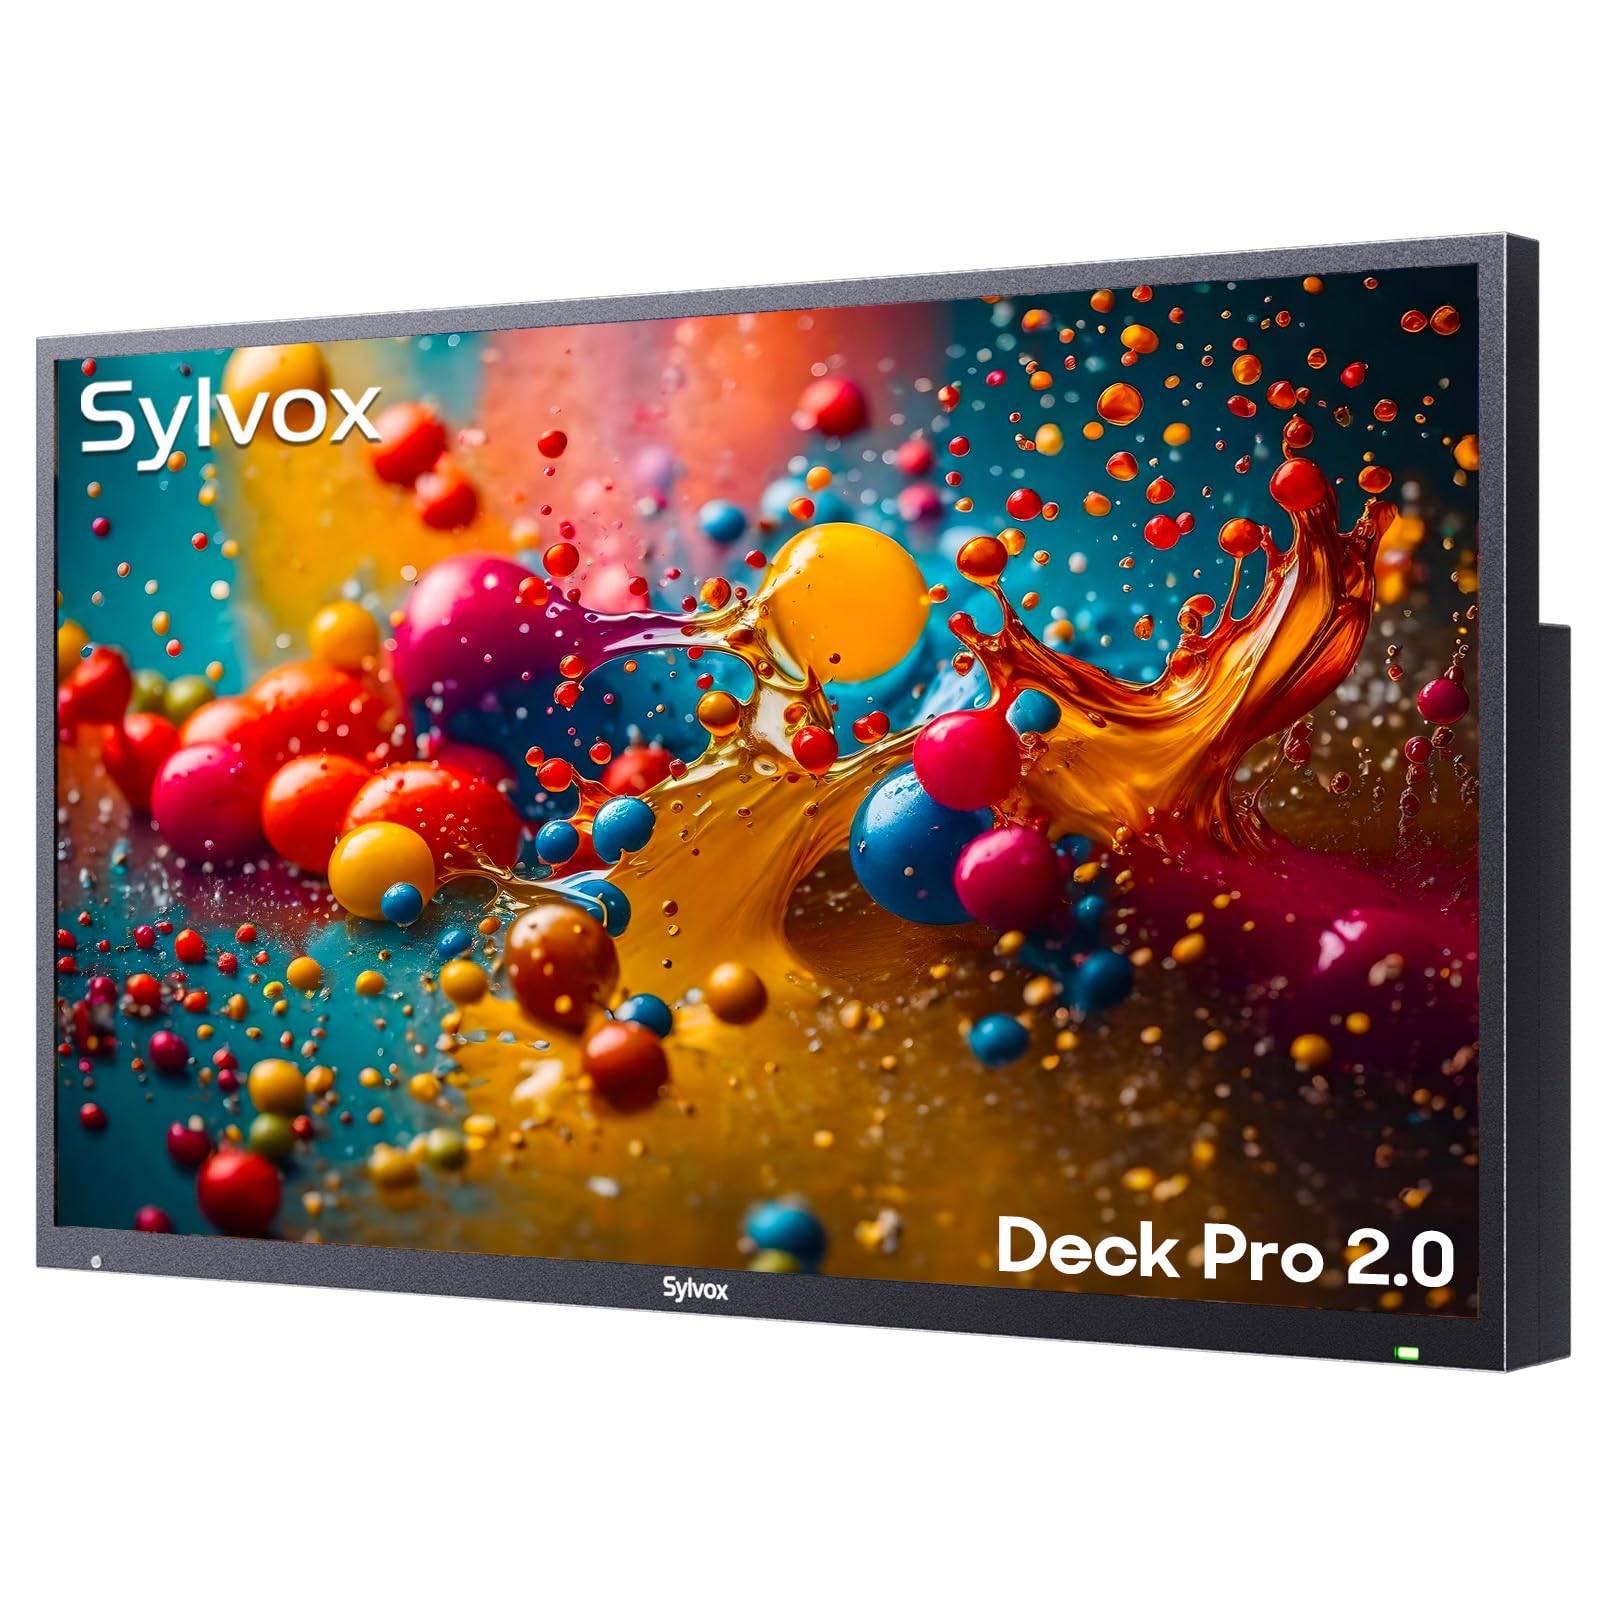 SYLVOX Smart Outdoor TV, 65 inch Outdoor Television Upgraded Google TV, 4K Weatherproof Outside TV, IP55 Waterproof, Google Assistant, Chromecast, 1000 nit Brightness for Partial Sun (Deck Pro 2.0)